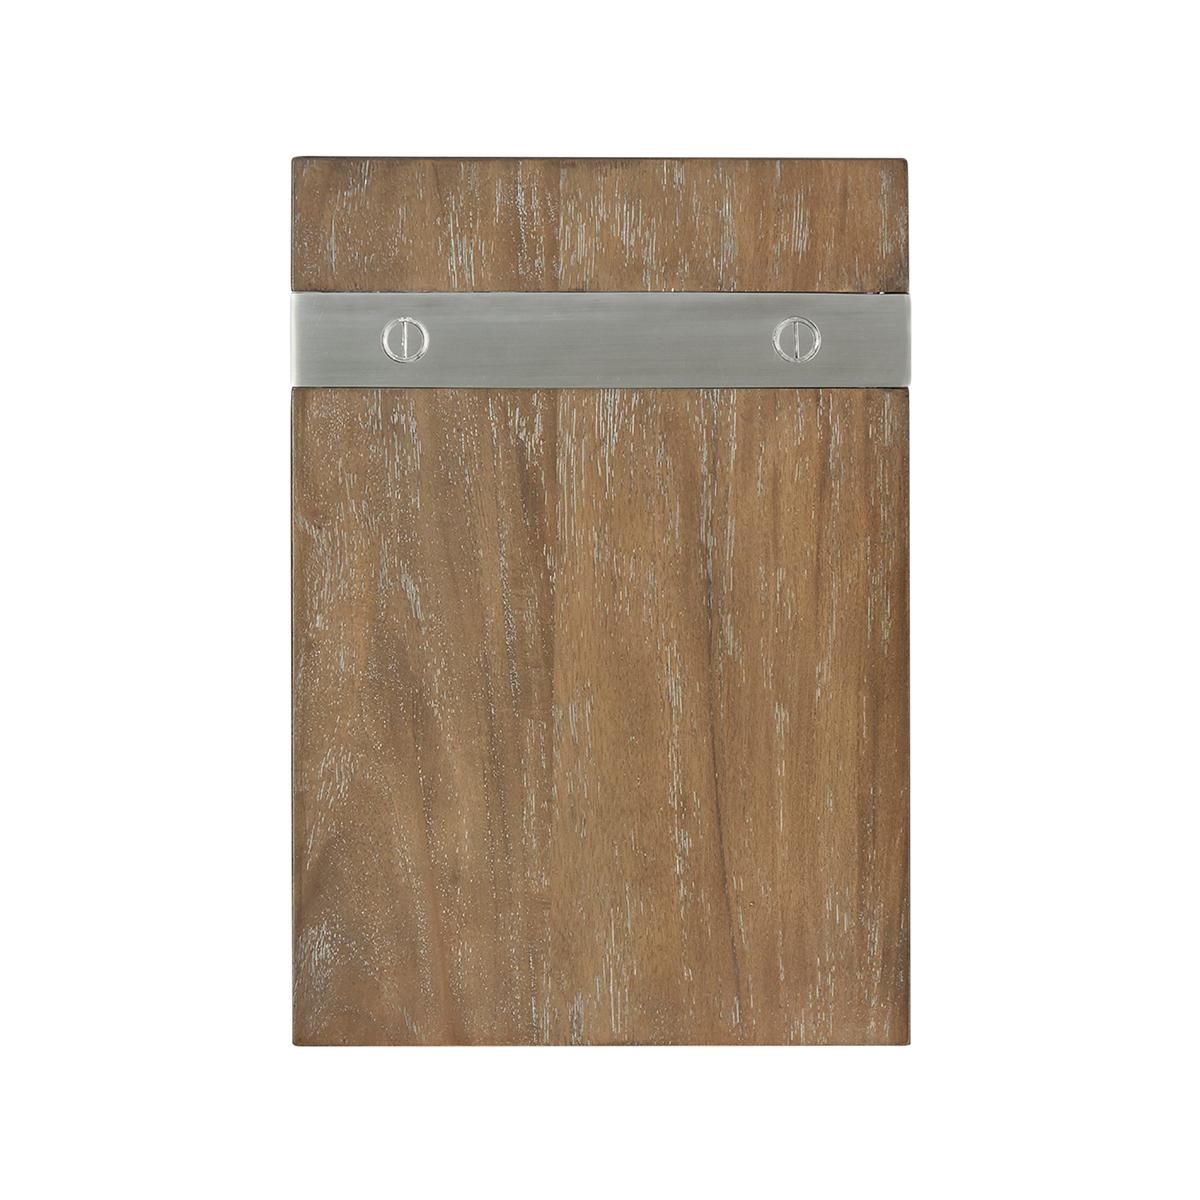 A simple modern cantilever design with a modern mangrove finish top, with a brushed nickel finish metal support and with industrial modern slot screw accents.

Dimensions: 10